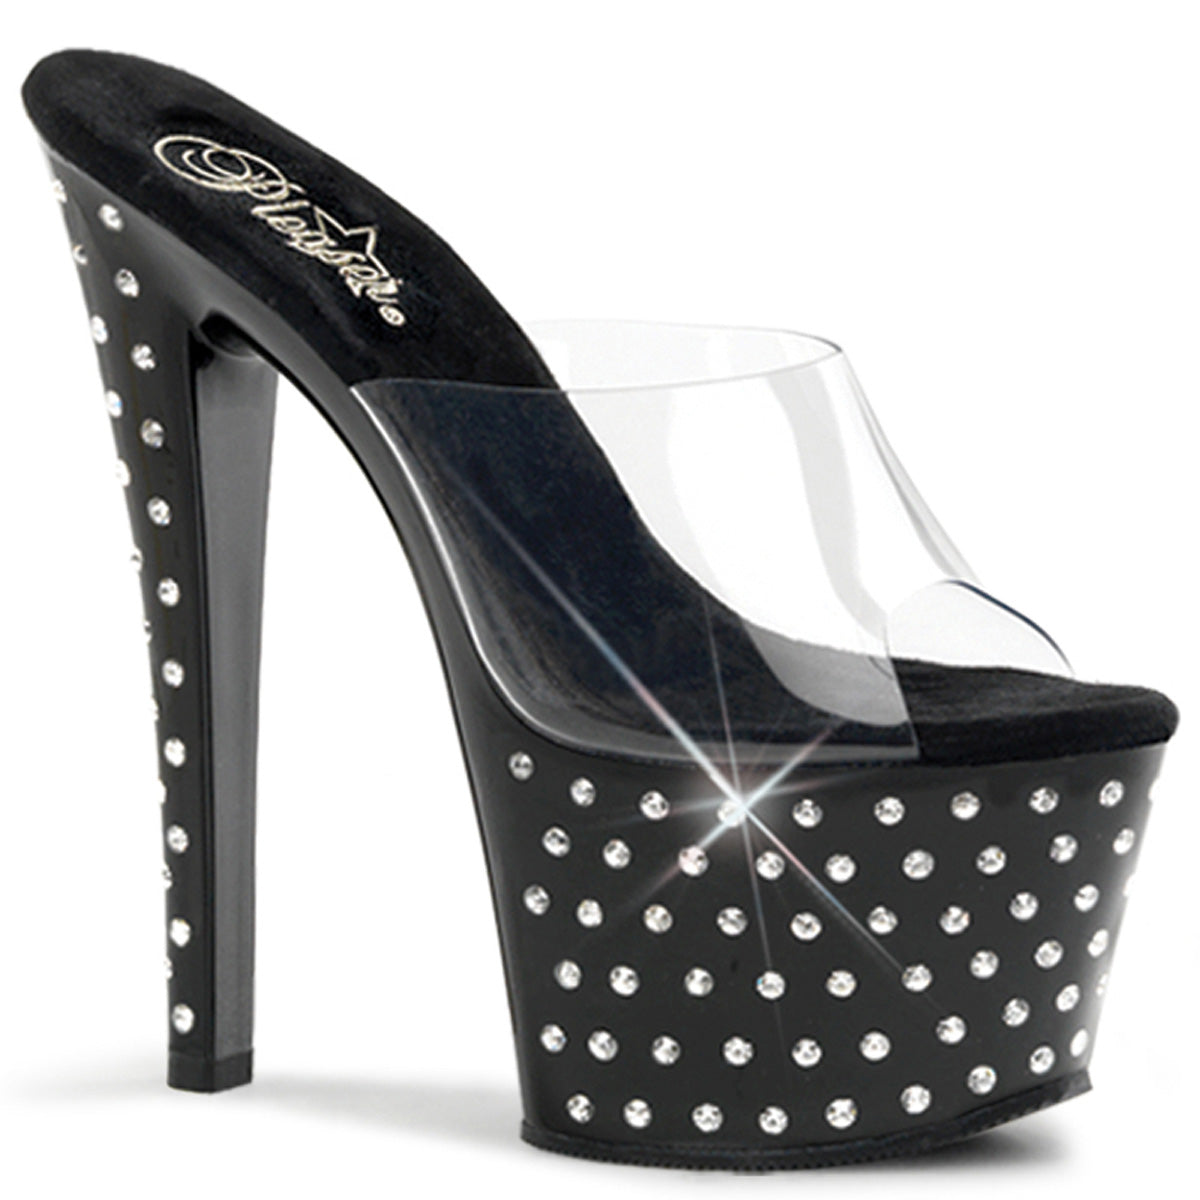 STARDUST-701 7" Heel Clear and Black Pole Dancing Platforms-Pleaser- Sexy Shoes